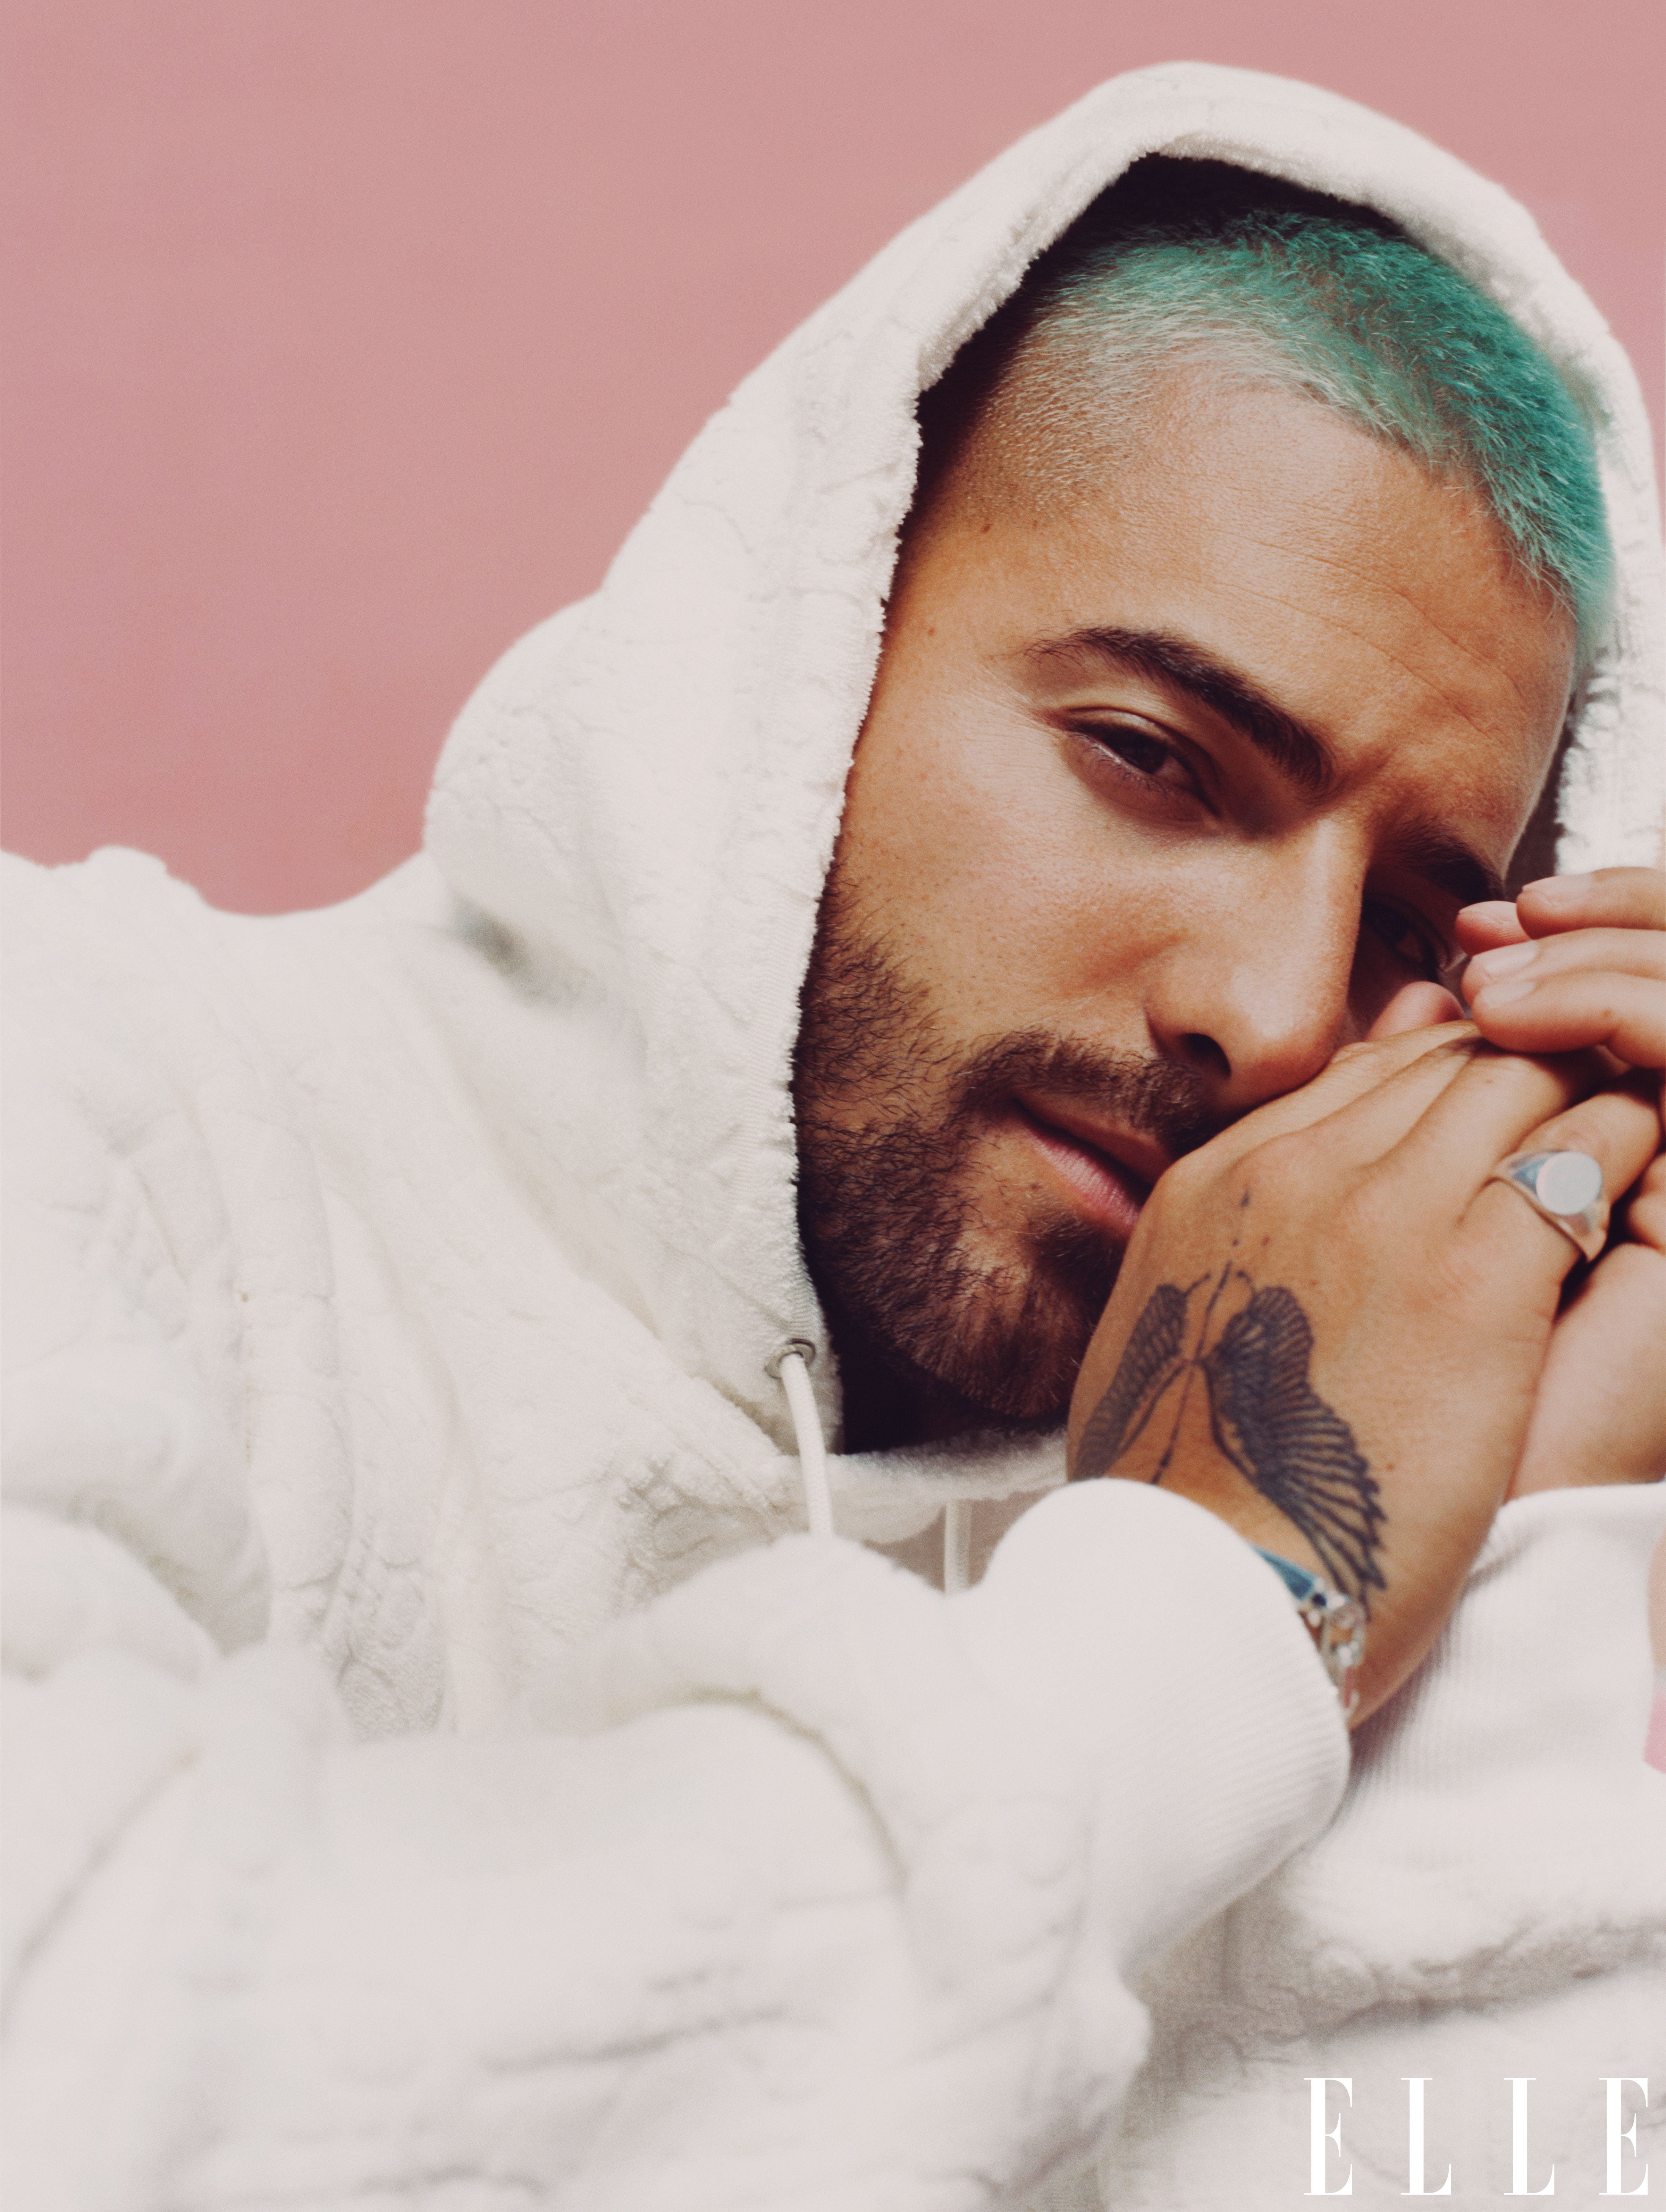 Why Maluma Says It's Hard for Him to Make Friends in the Industry